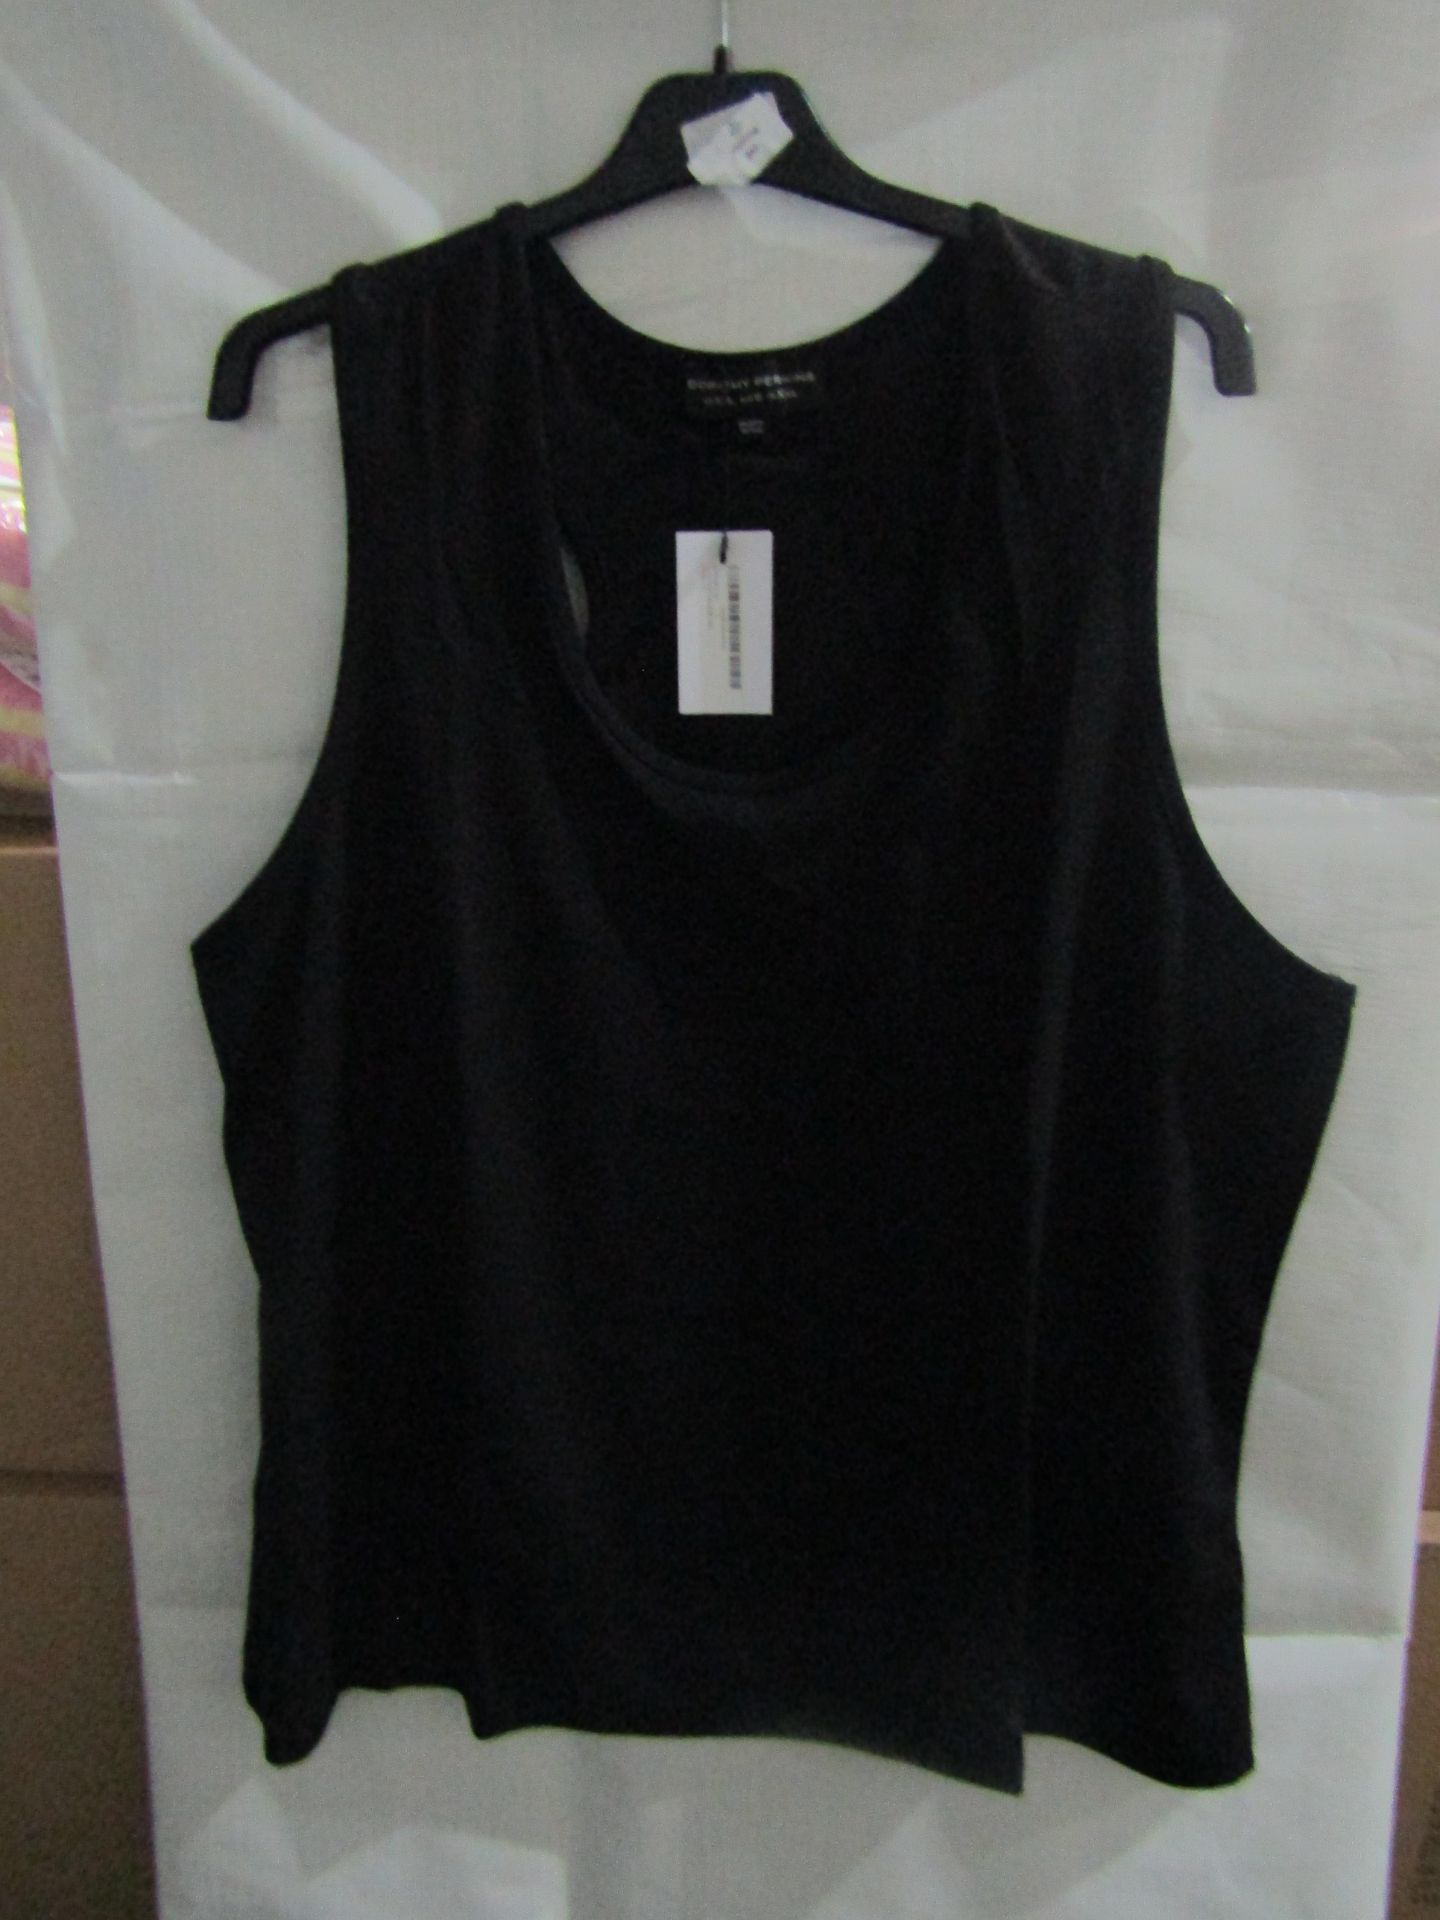 5 X Ladies Dorothy Perkins Curve Active Full Length Vest Black Size X/L New & PACKAGED